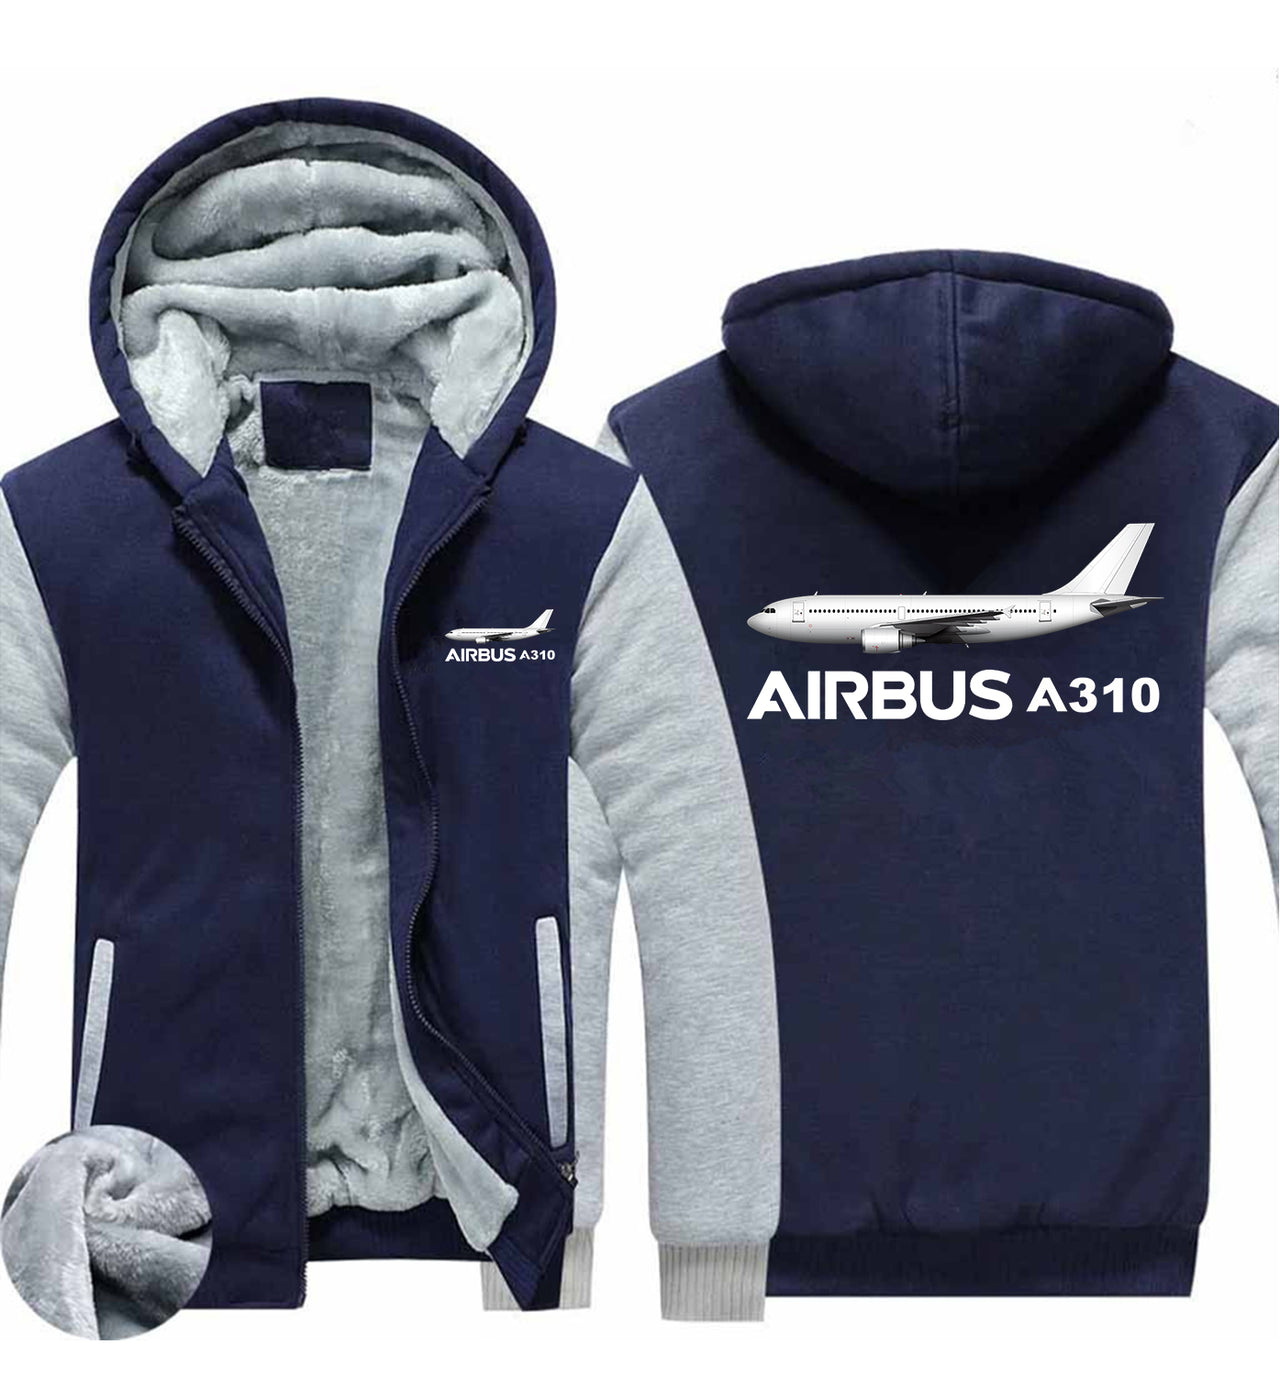 The Airbus A310 Designed Zipped Sweatshirts